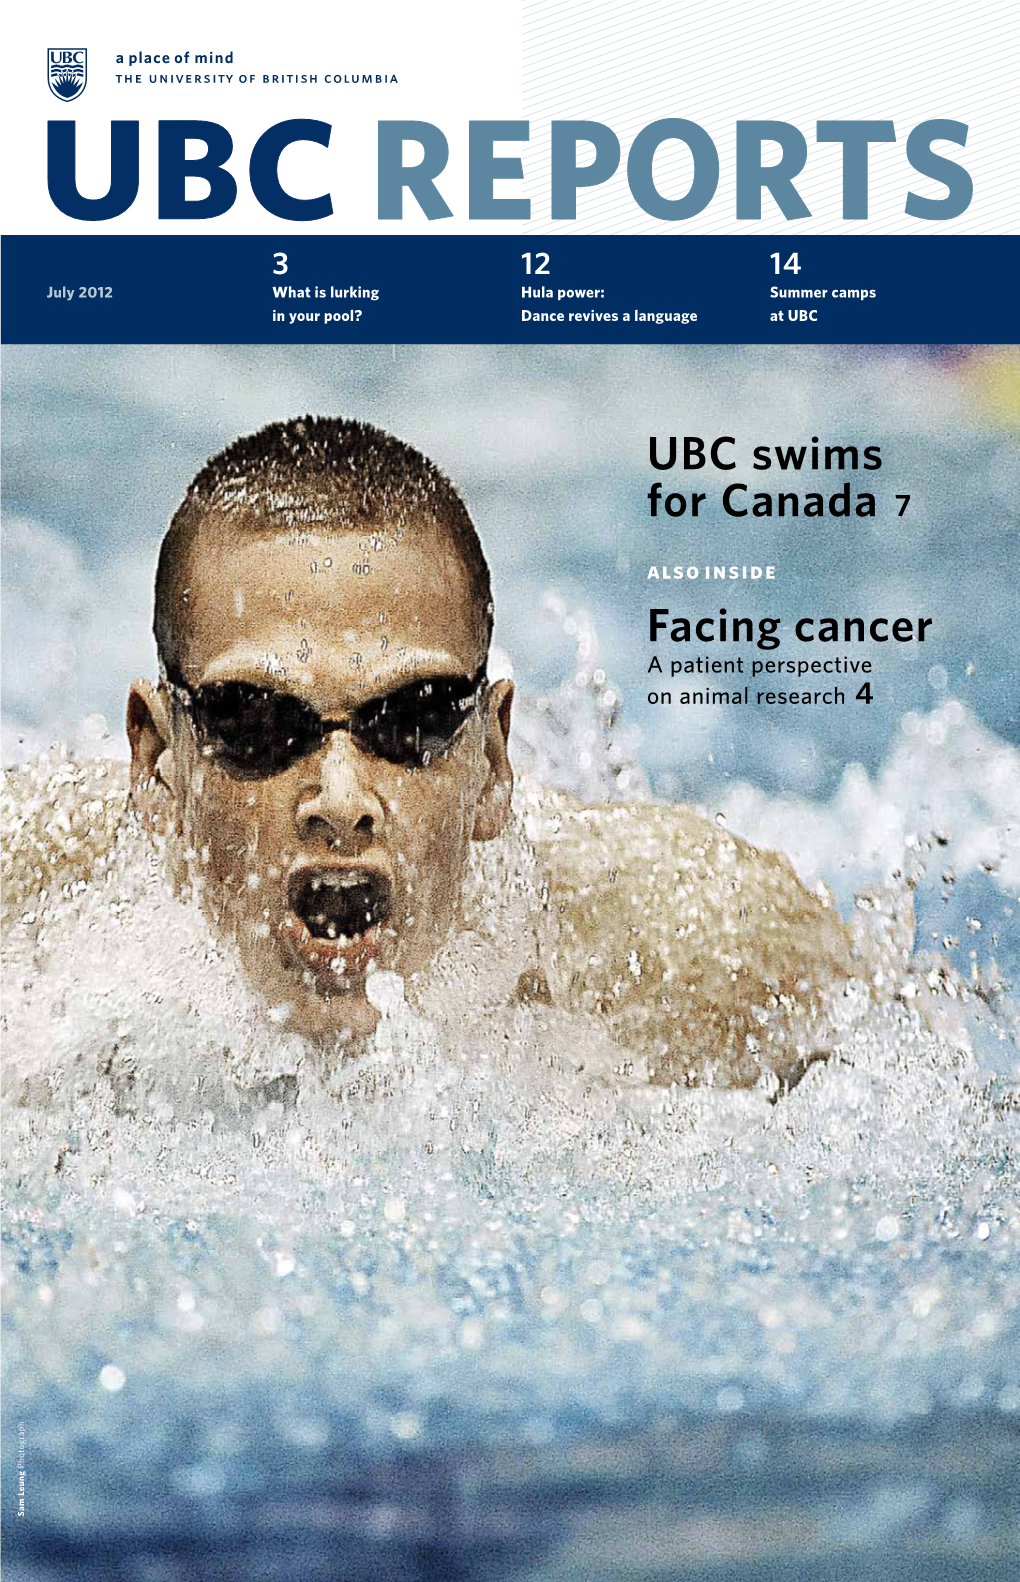 UBC Swims for Canada 7 Facing Cancer